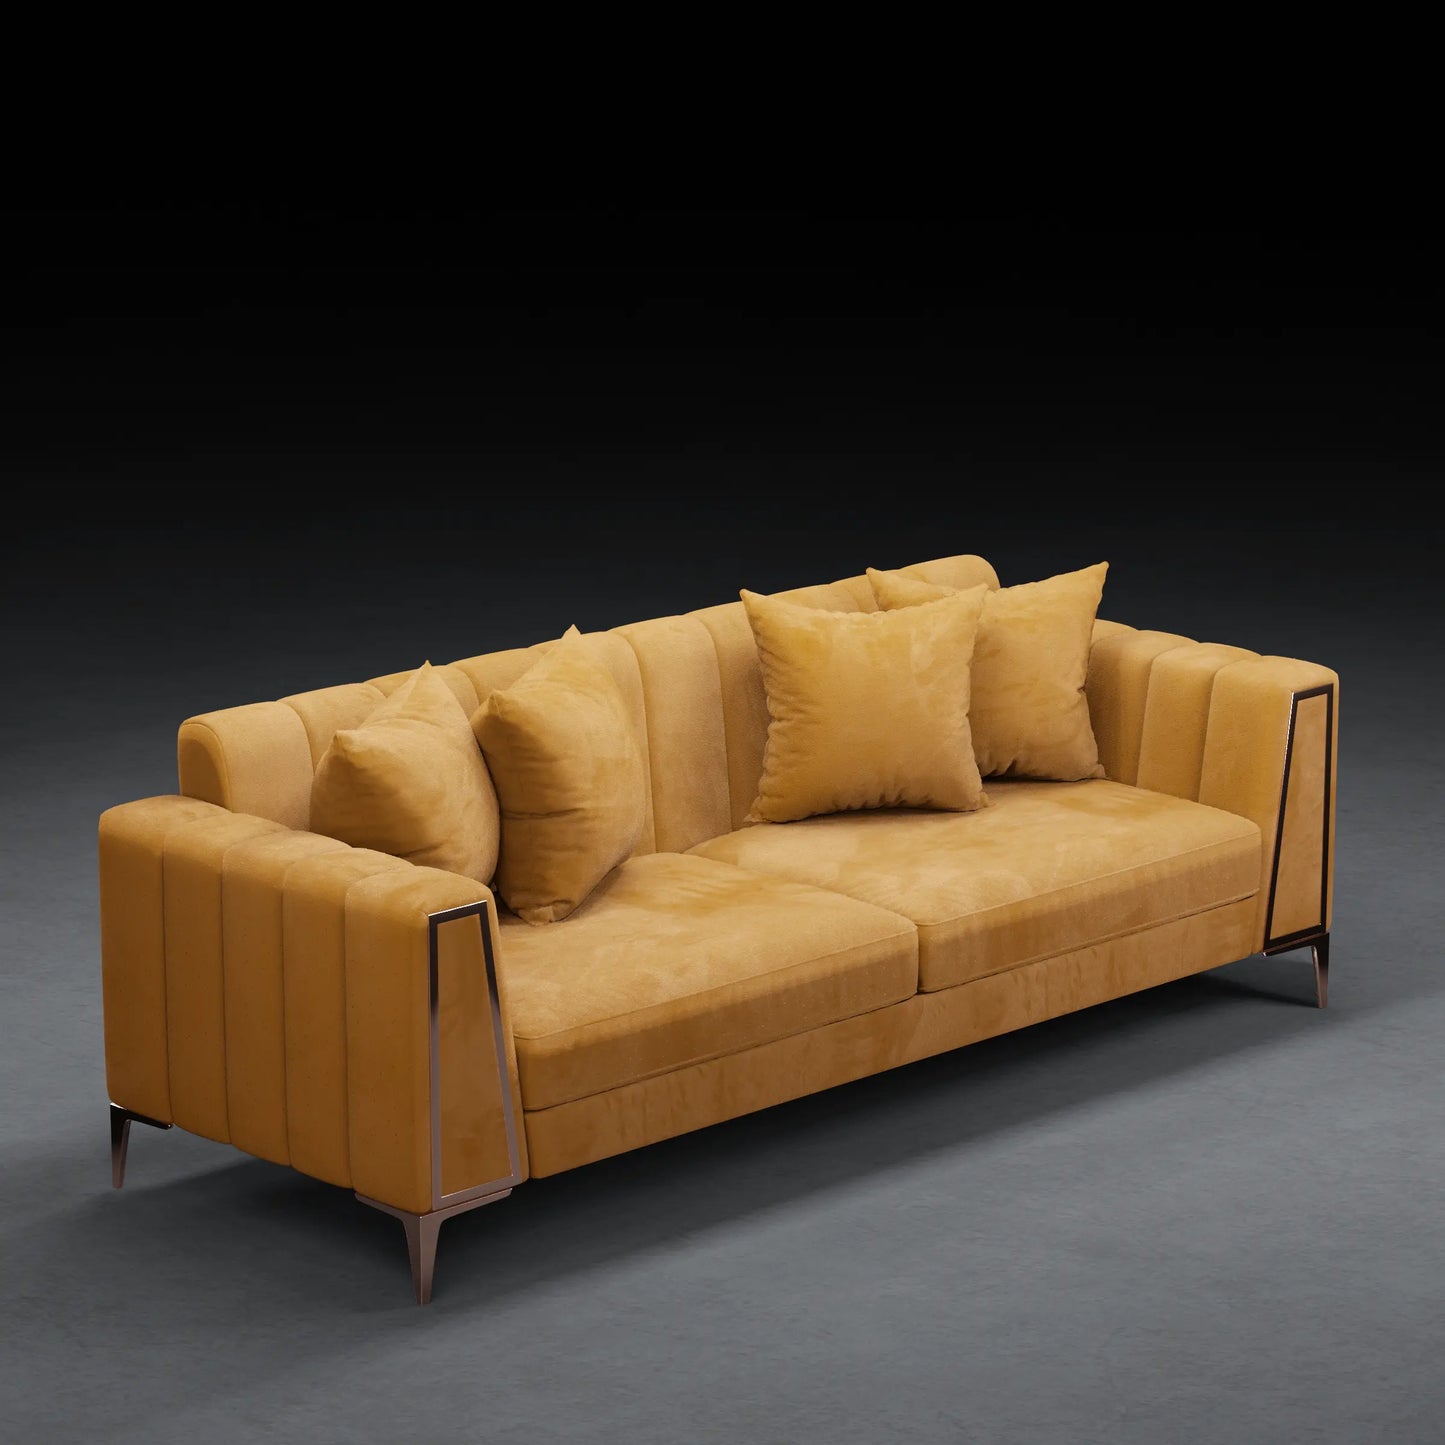 Grape - Contemporary 4 Seater Couch in Velvet Finish | Yellow Ochre Color